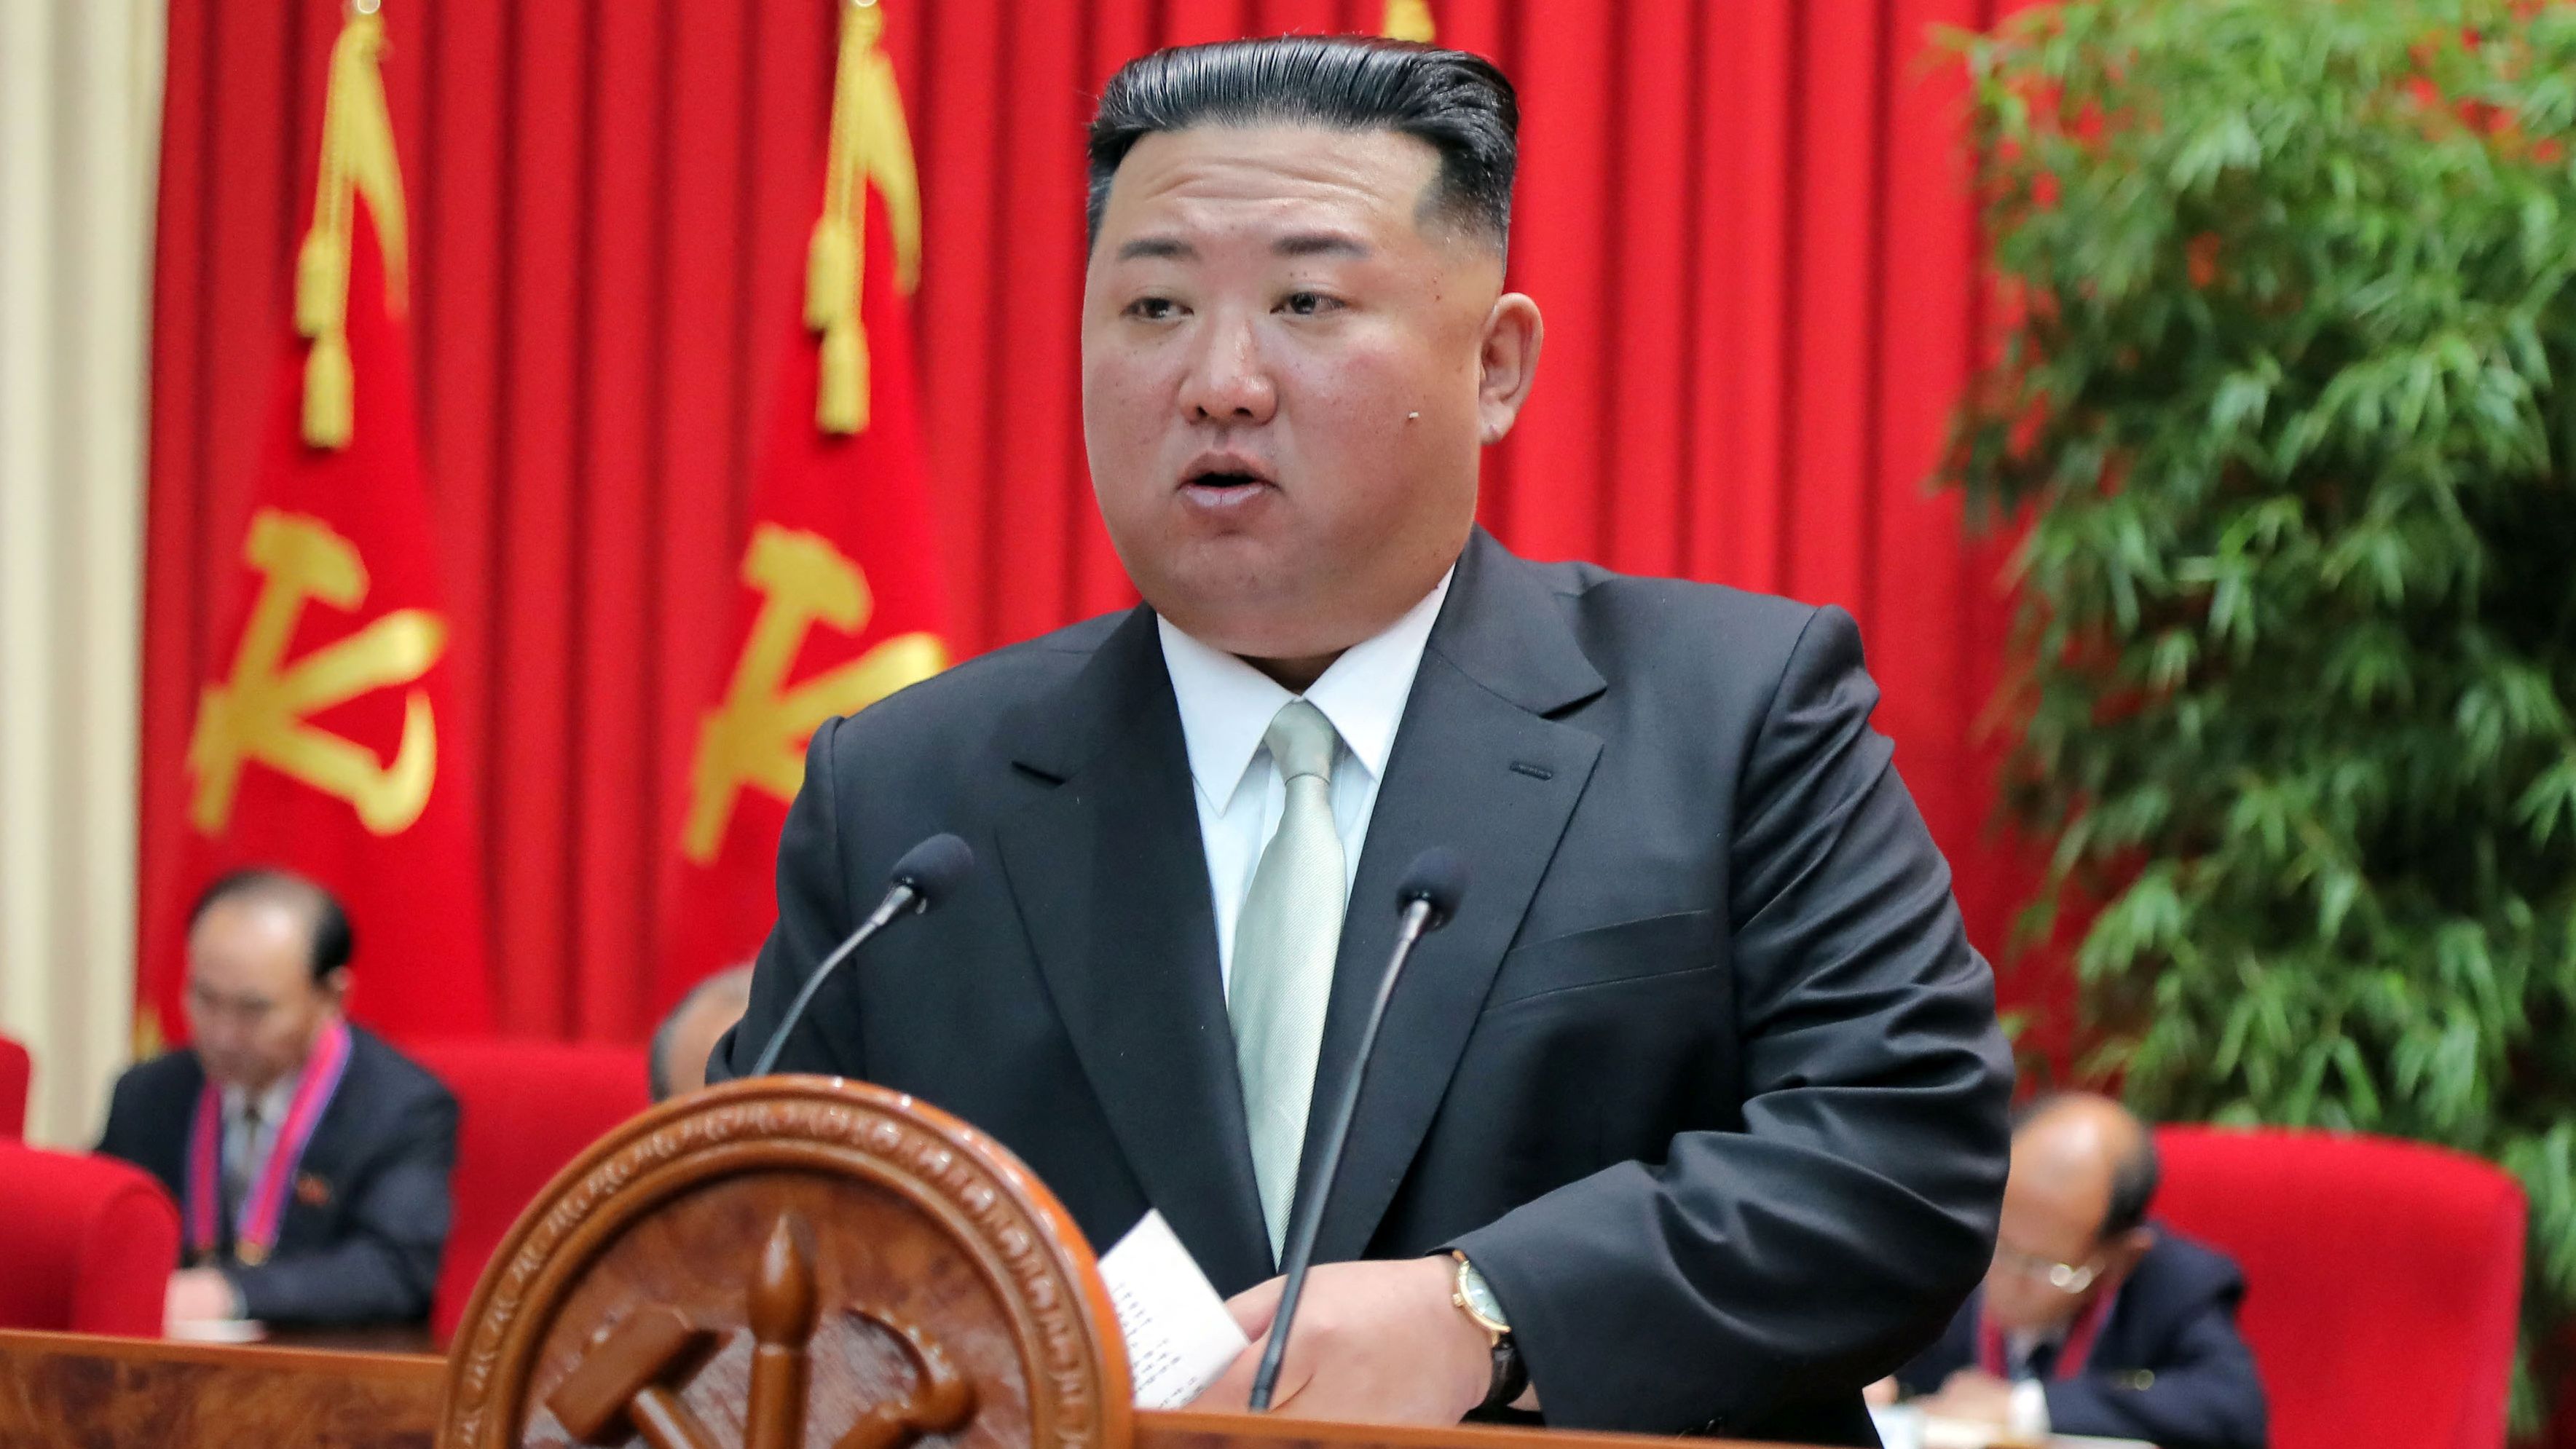 North Korean leader Kim Jong Un speaking in Pyongyang, North Korea, in an undated photo released  October 18 by the state-run Korean Central News Agency.